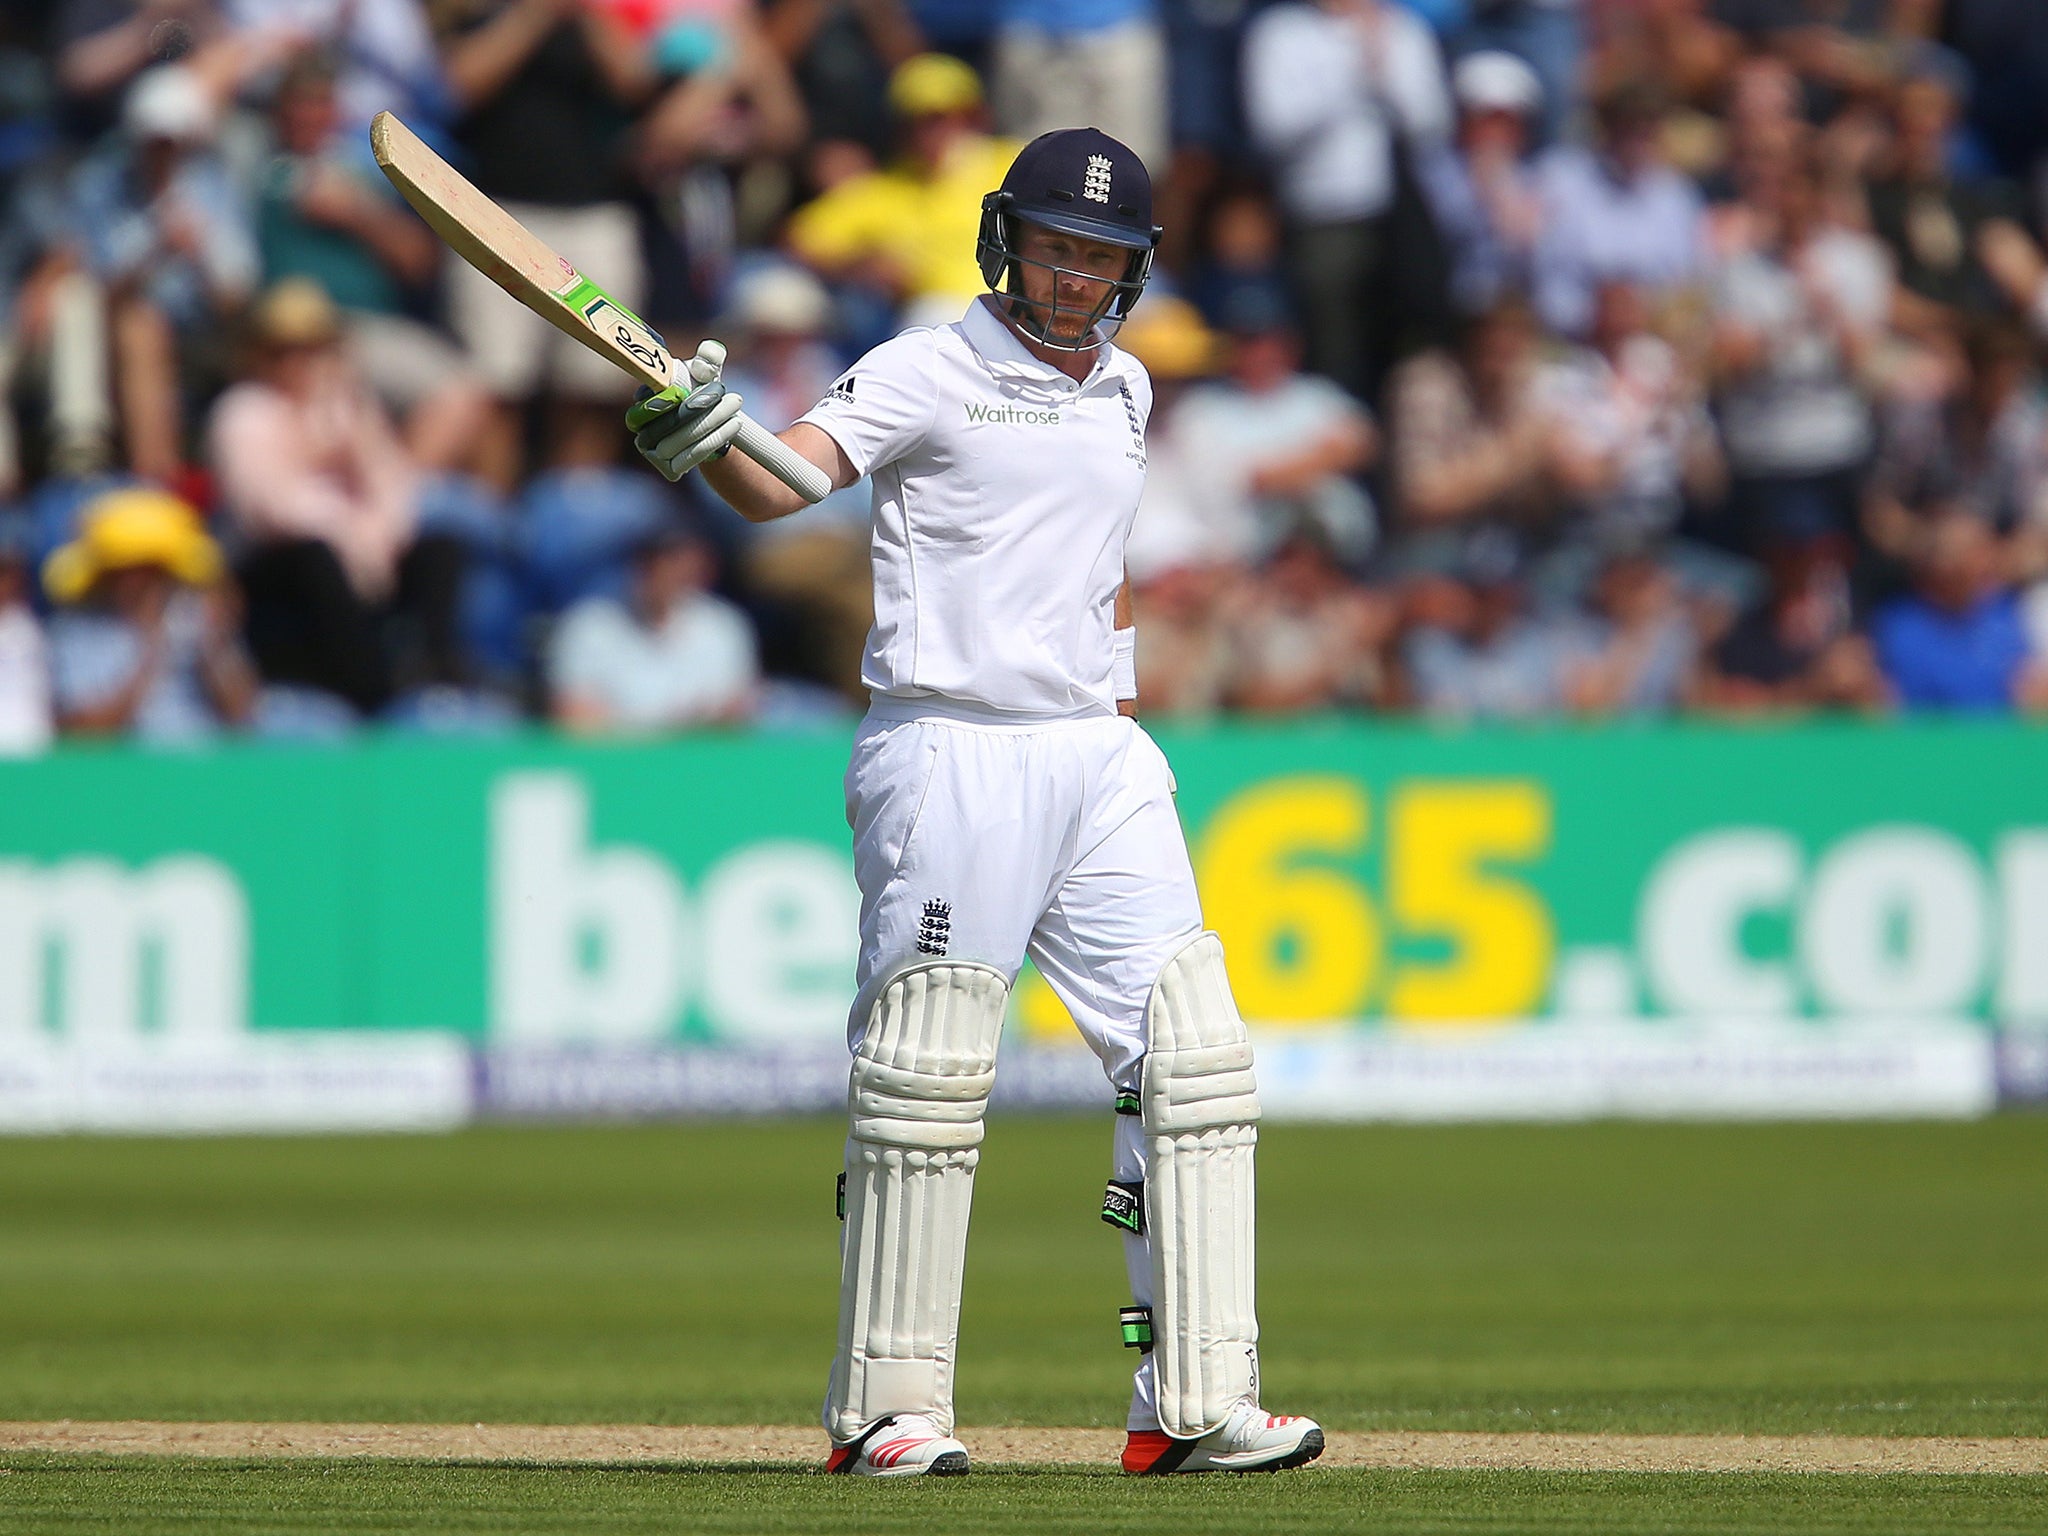 Ian Bell reached 60 to steady the ship